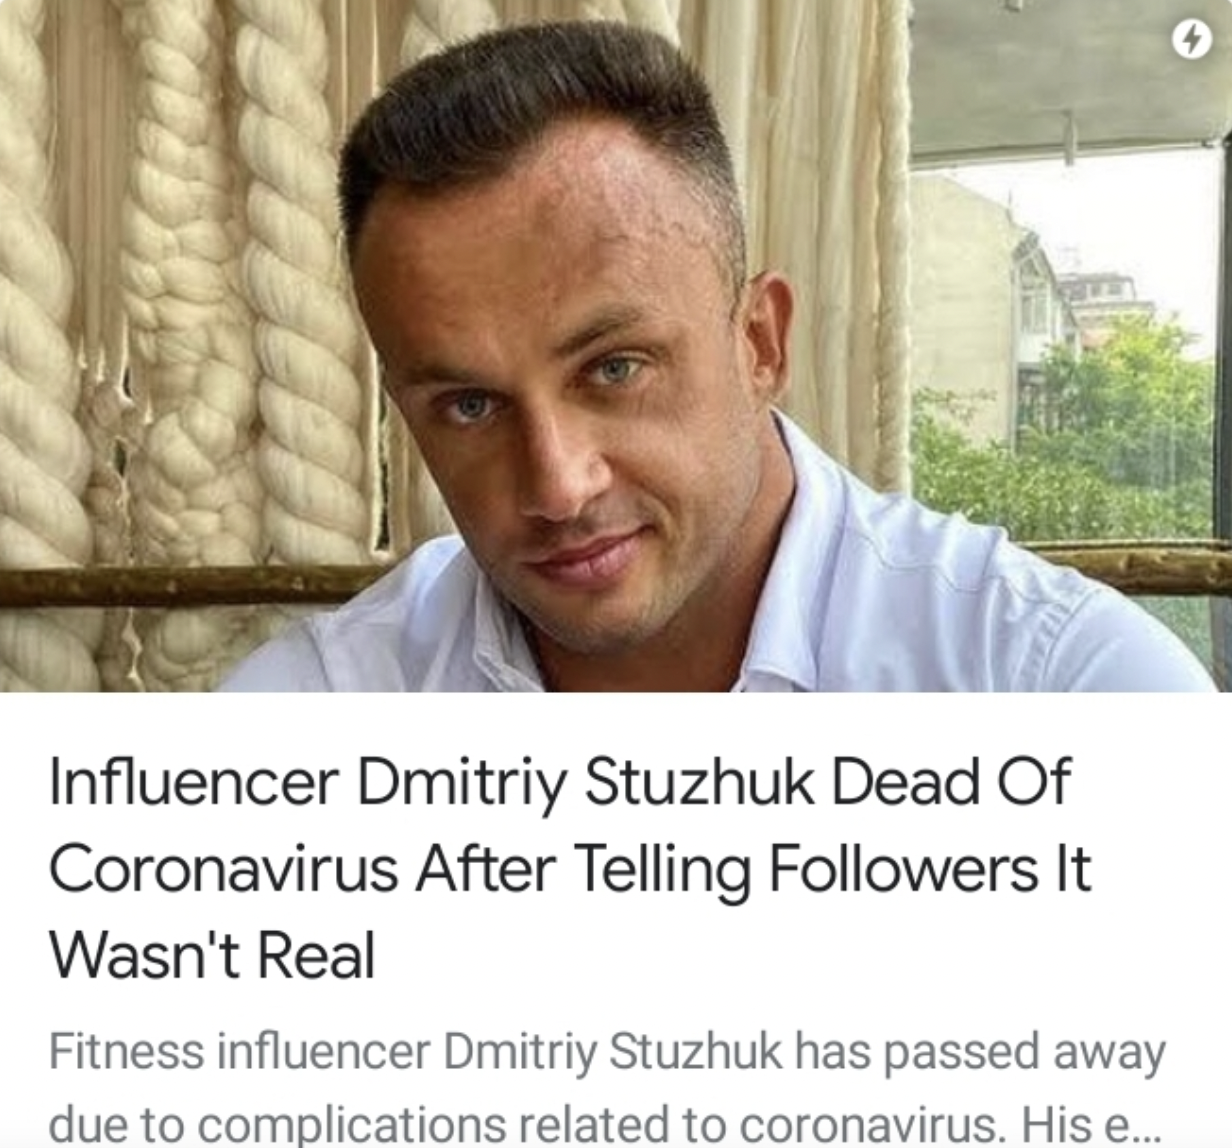 Influencer Dmitriy Stuzhuk Dead Of Coronavirus After Telling ers It Wasn't Real Fitness influencer Dmitriy Stuzhuk has passed away due to complications related to coronavirus. His e..